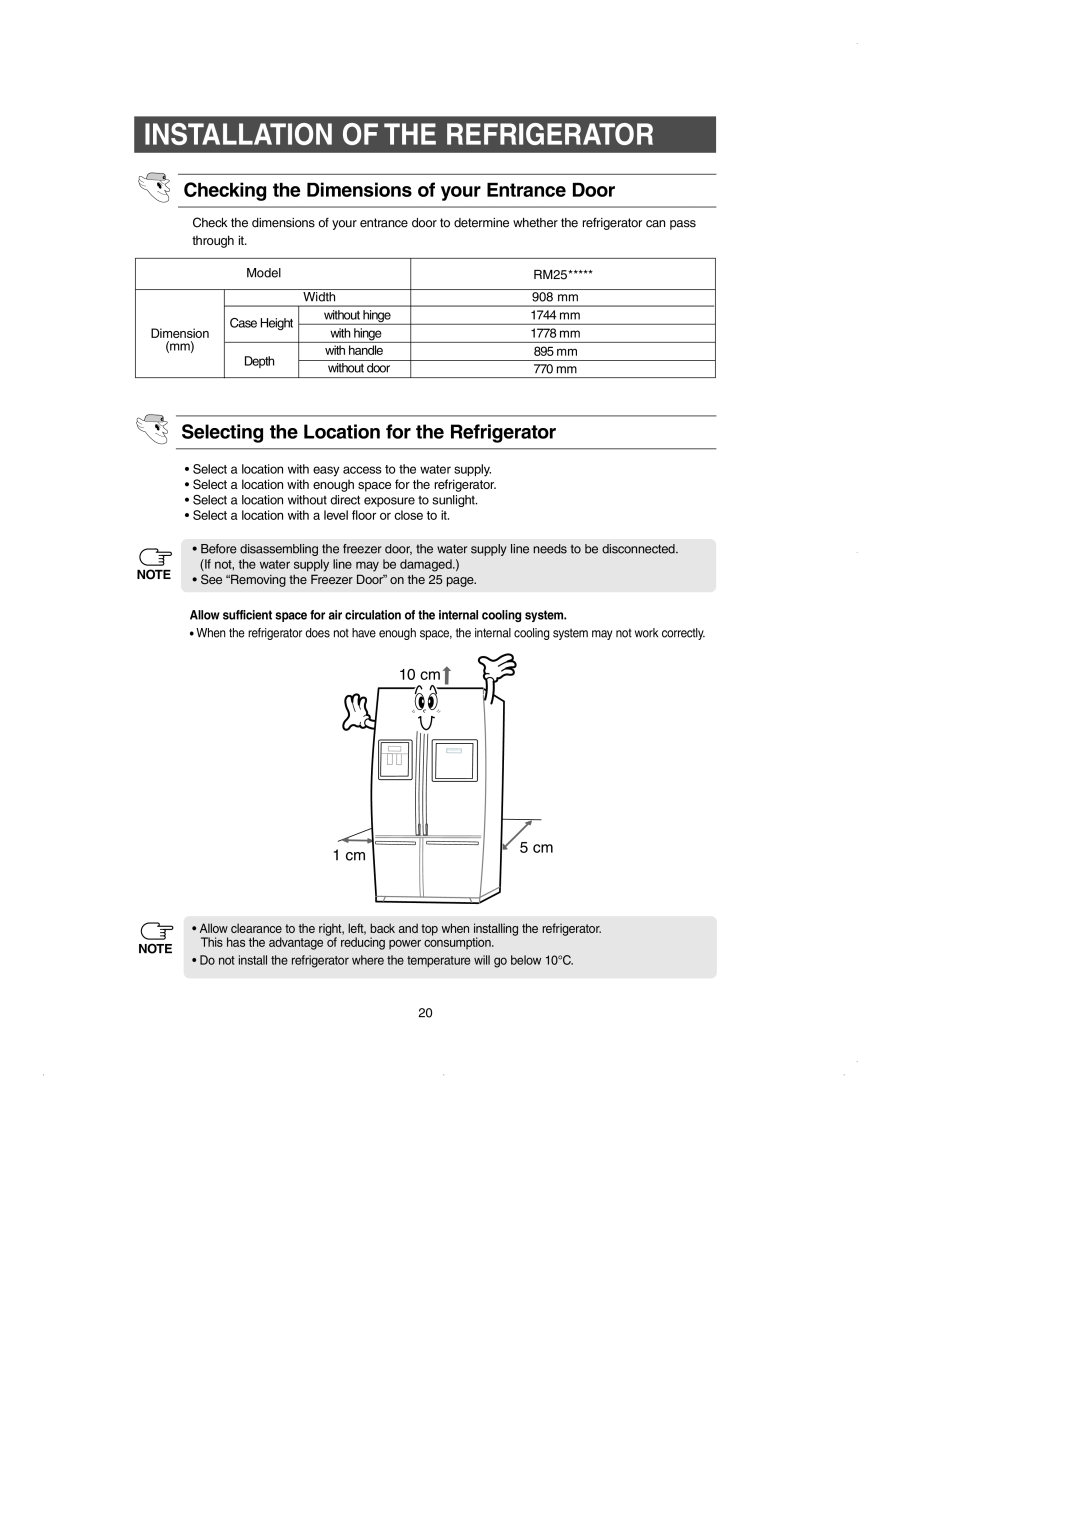 GE RM25 owner manual Installation Of The Refrigerator, Checking the Dimensions of your Entrance Door, 10 cm, 1 cm, 5 cm 